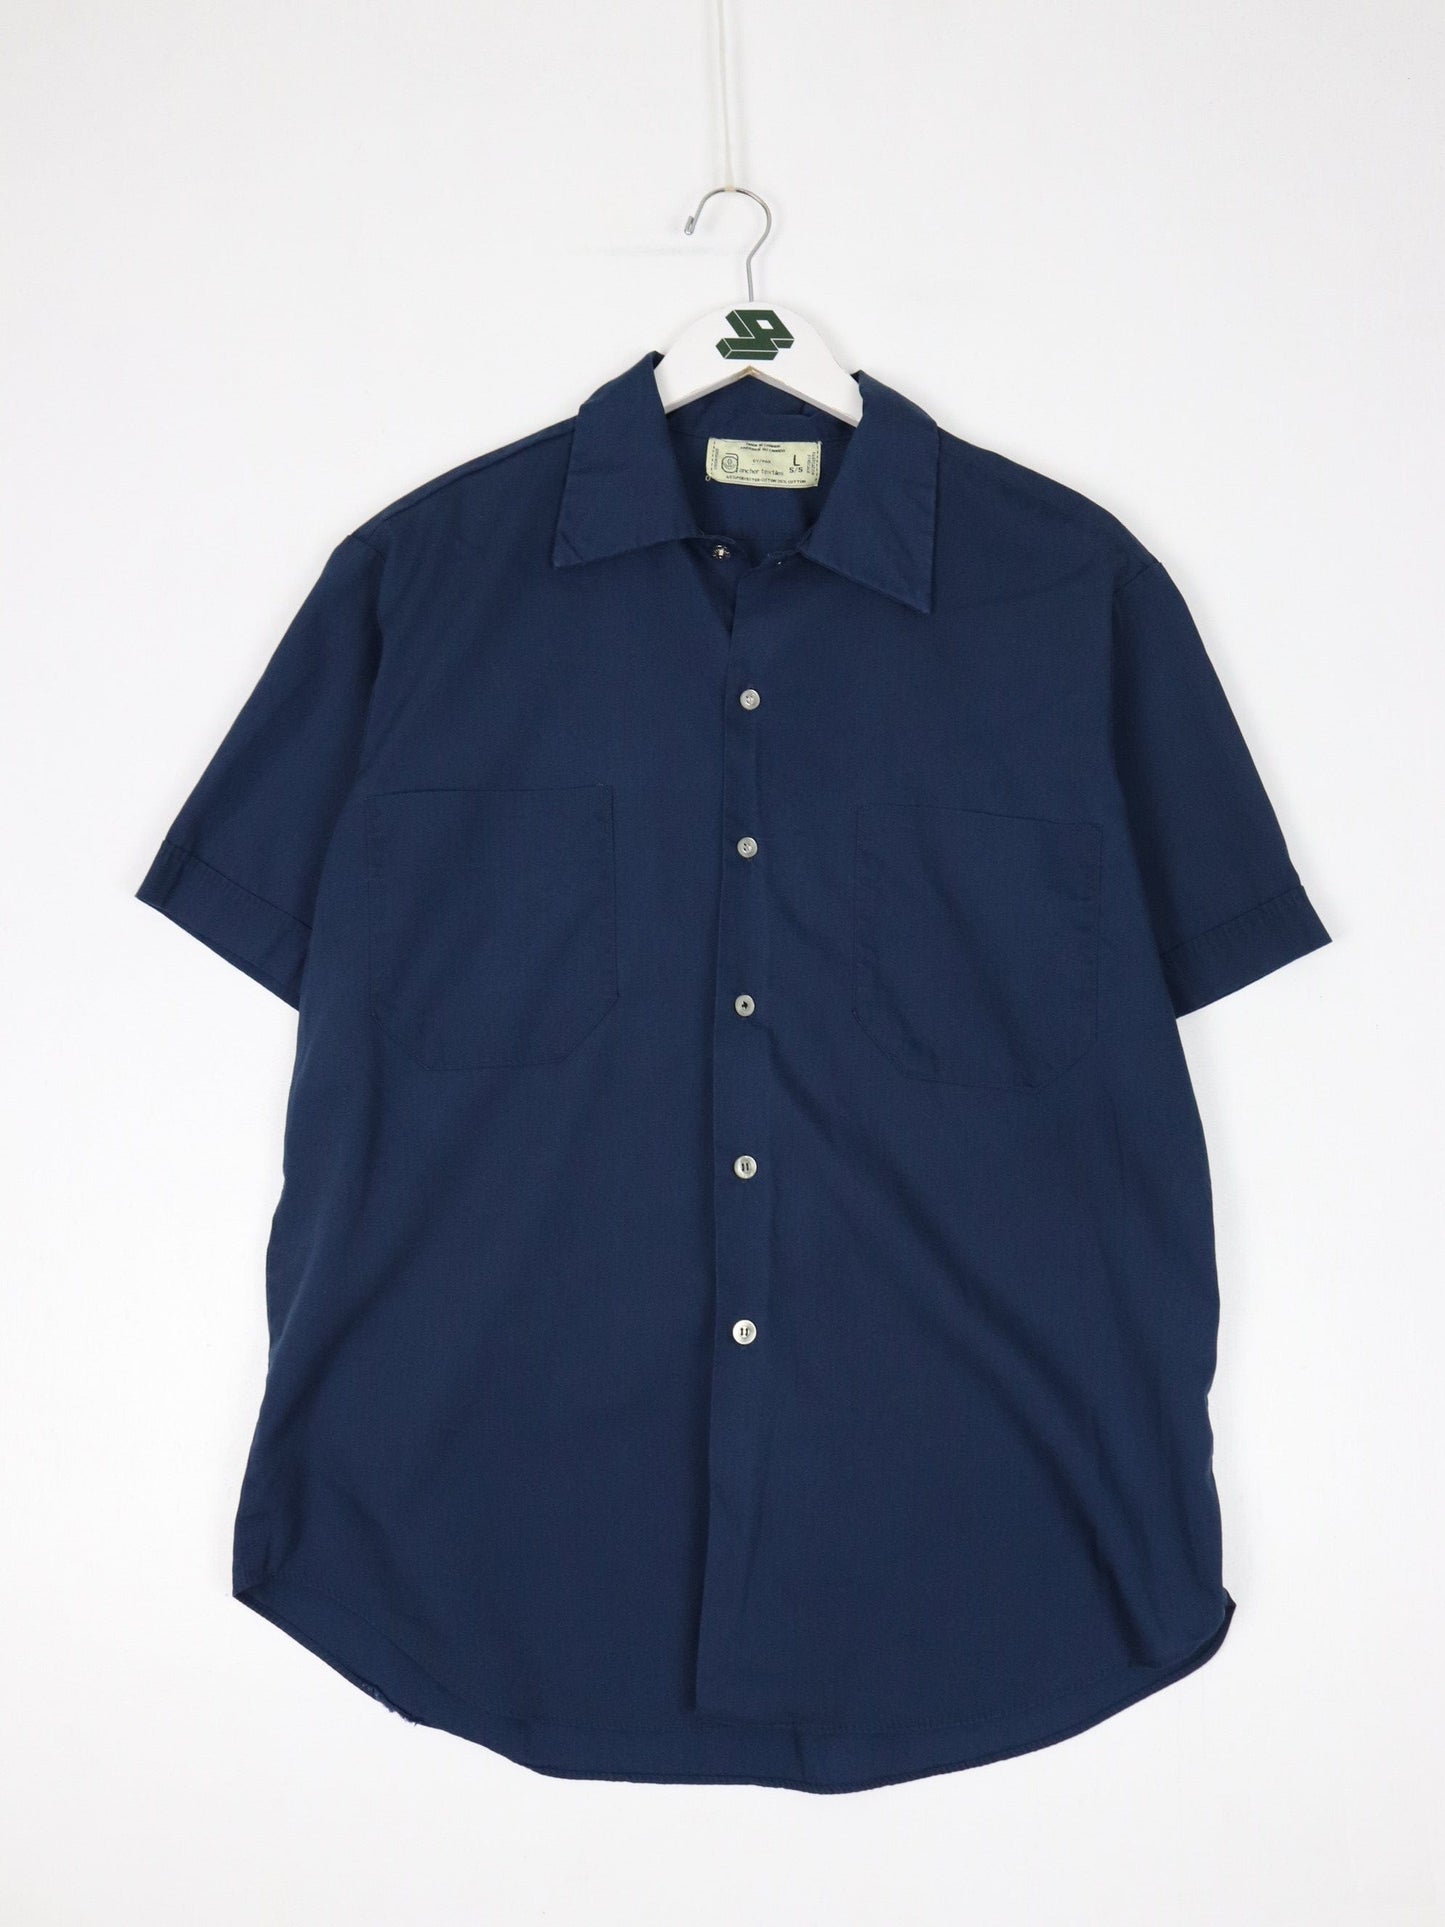 Other Button Up Shirts Vintage Anchor Textiles Shirt Mens Large Blue Short Sleeve Button Up